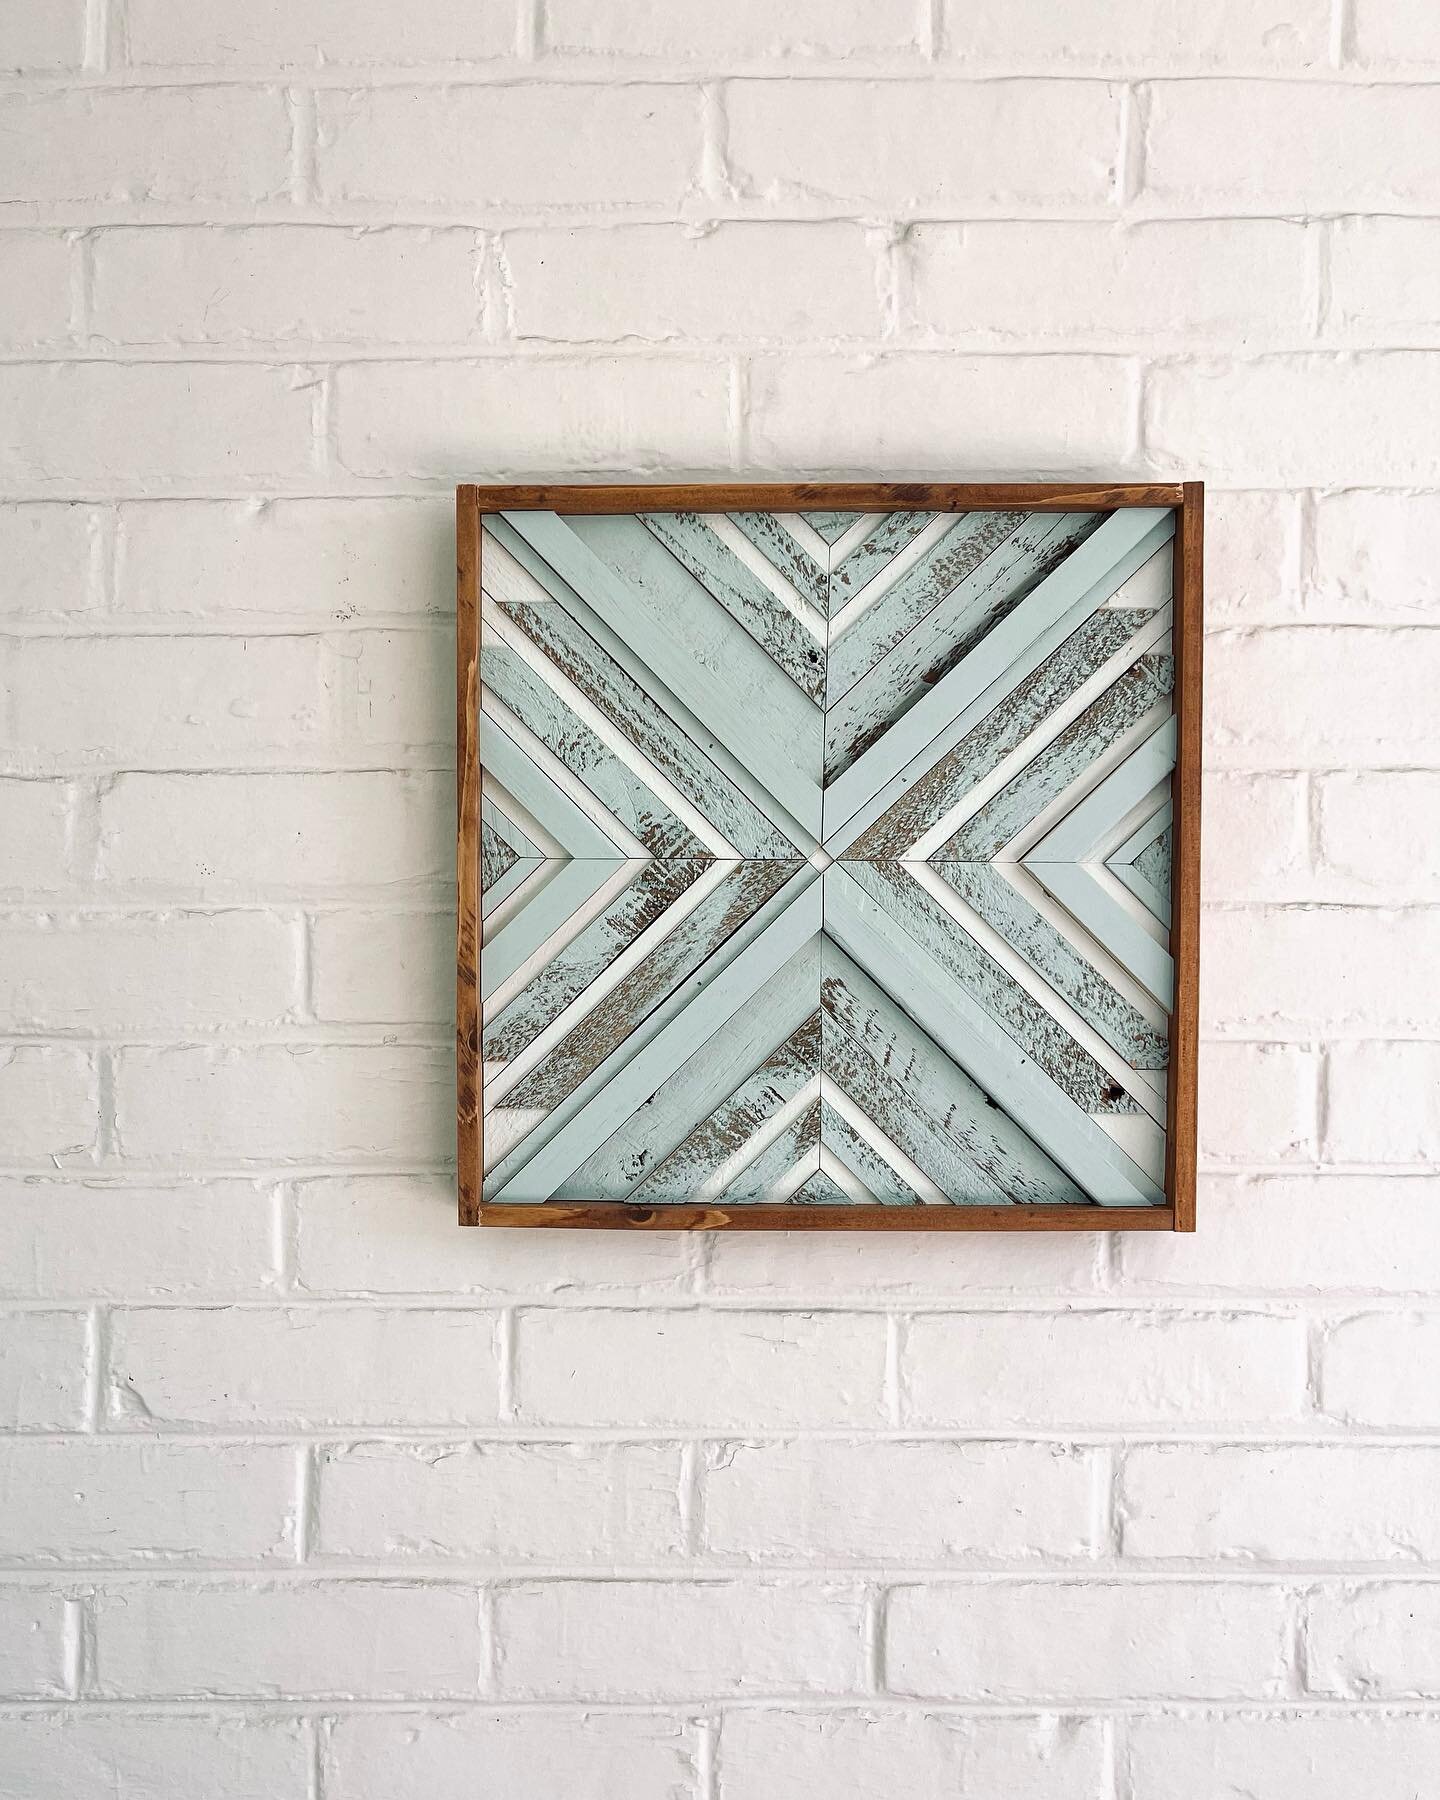 Number 333. 
.
This color is called spring breeze and I ❤️ it. The subtle blues and mint tones paired with the textures of the wood are what make these pieces so unique. 
.
Hope you guys are having a great Monday and enjoying some of this amazing wea